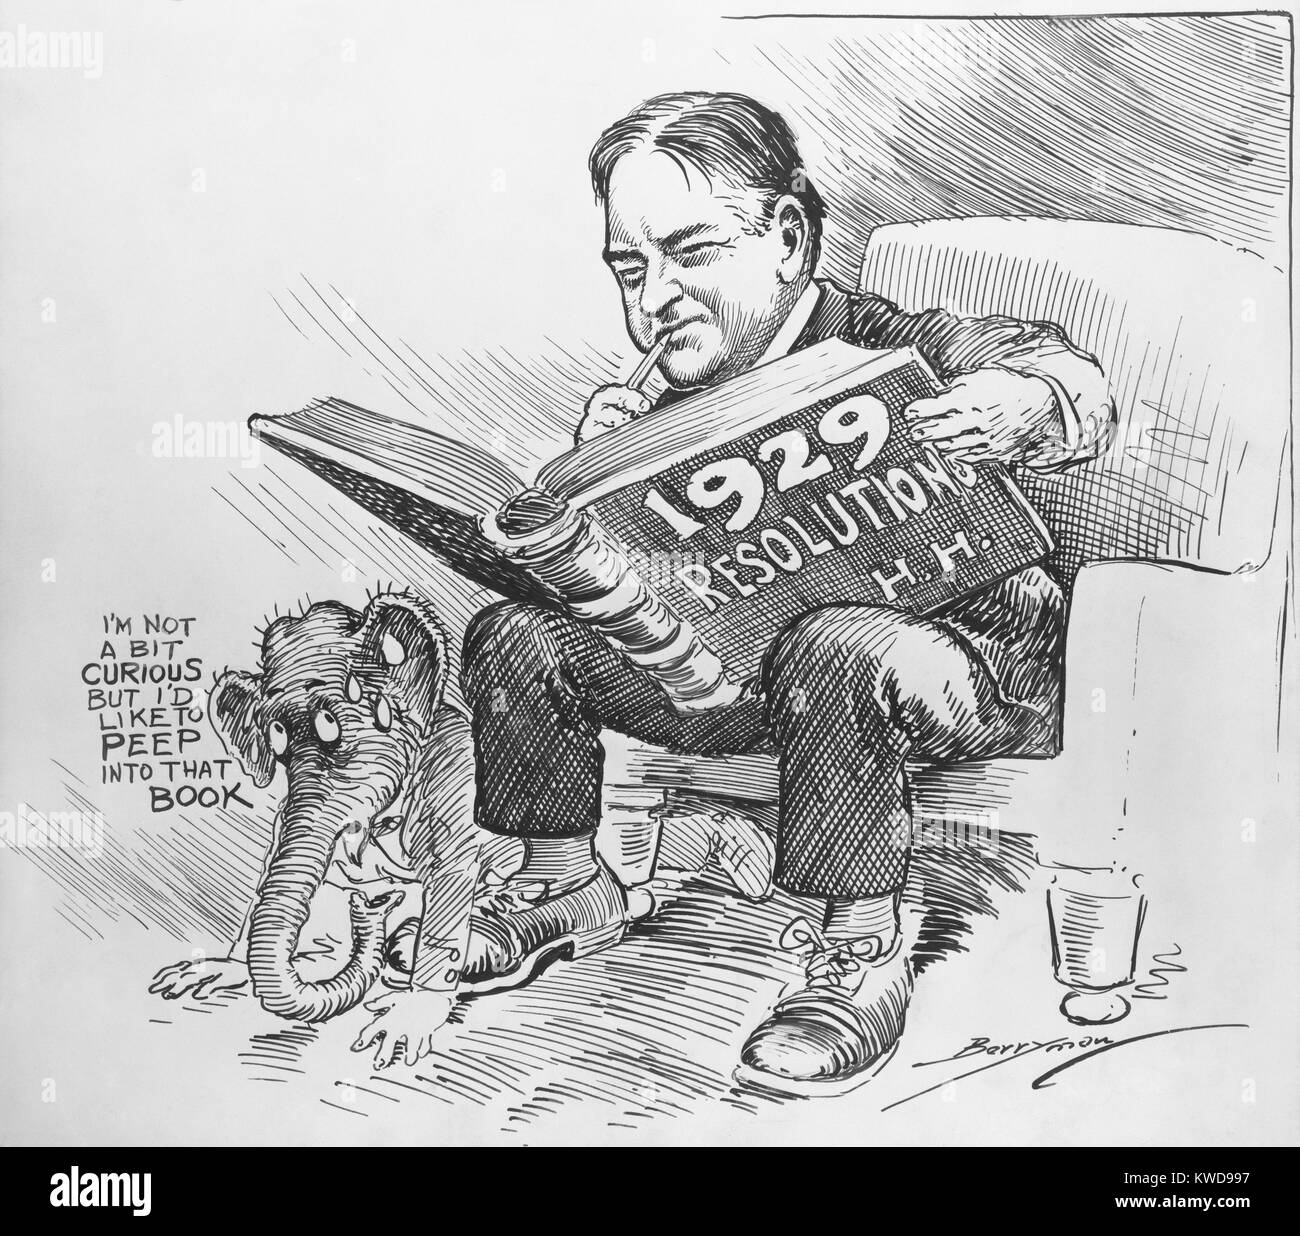 President-Elect Herbert Hoover reading a book entitled '1929 Resolutions, H.H.' A worried GOP elephant looks on, wondering what he plans to do. Cartoon by Clifford Berryman. (BSLOC 2015 16 72) Stock Photo